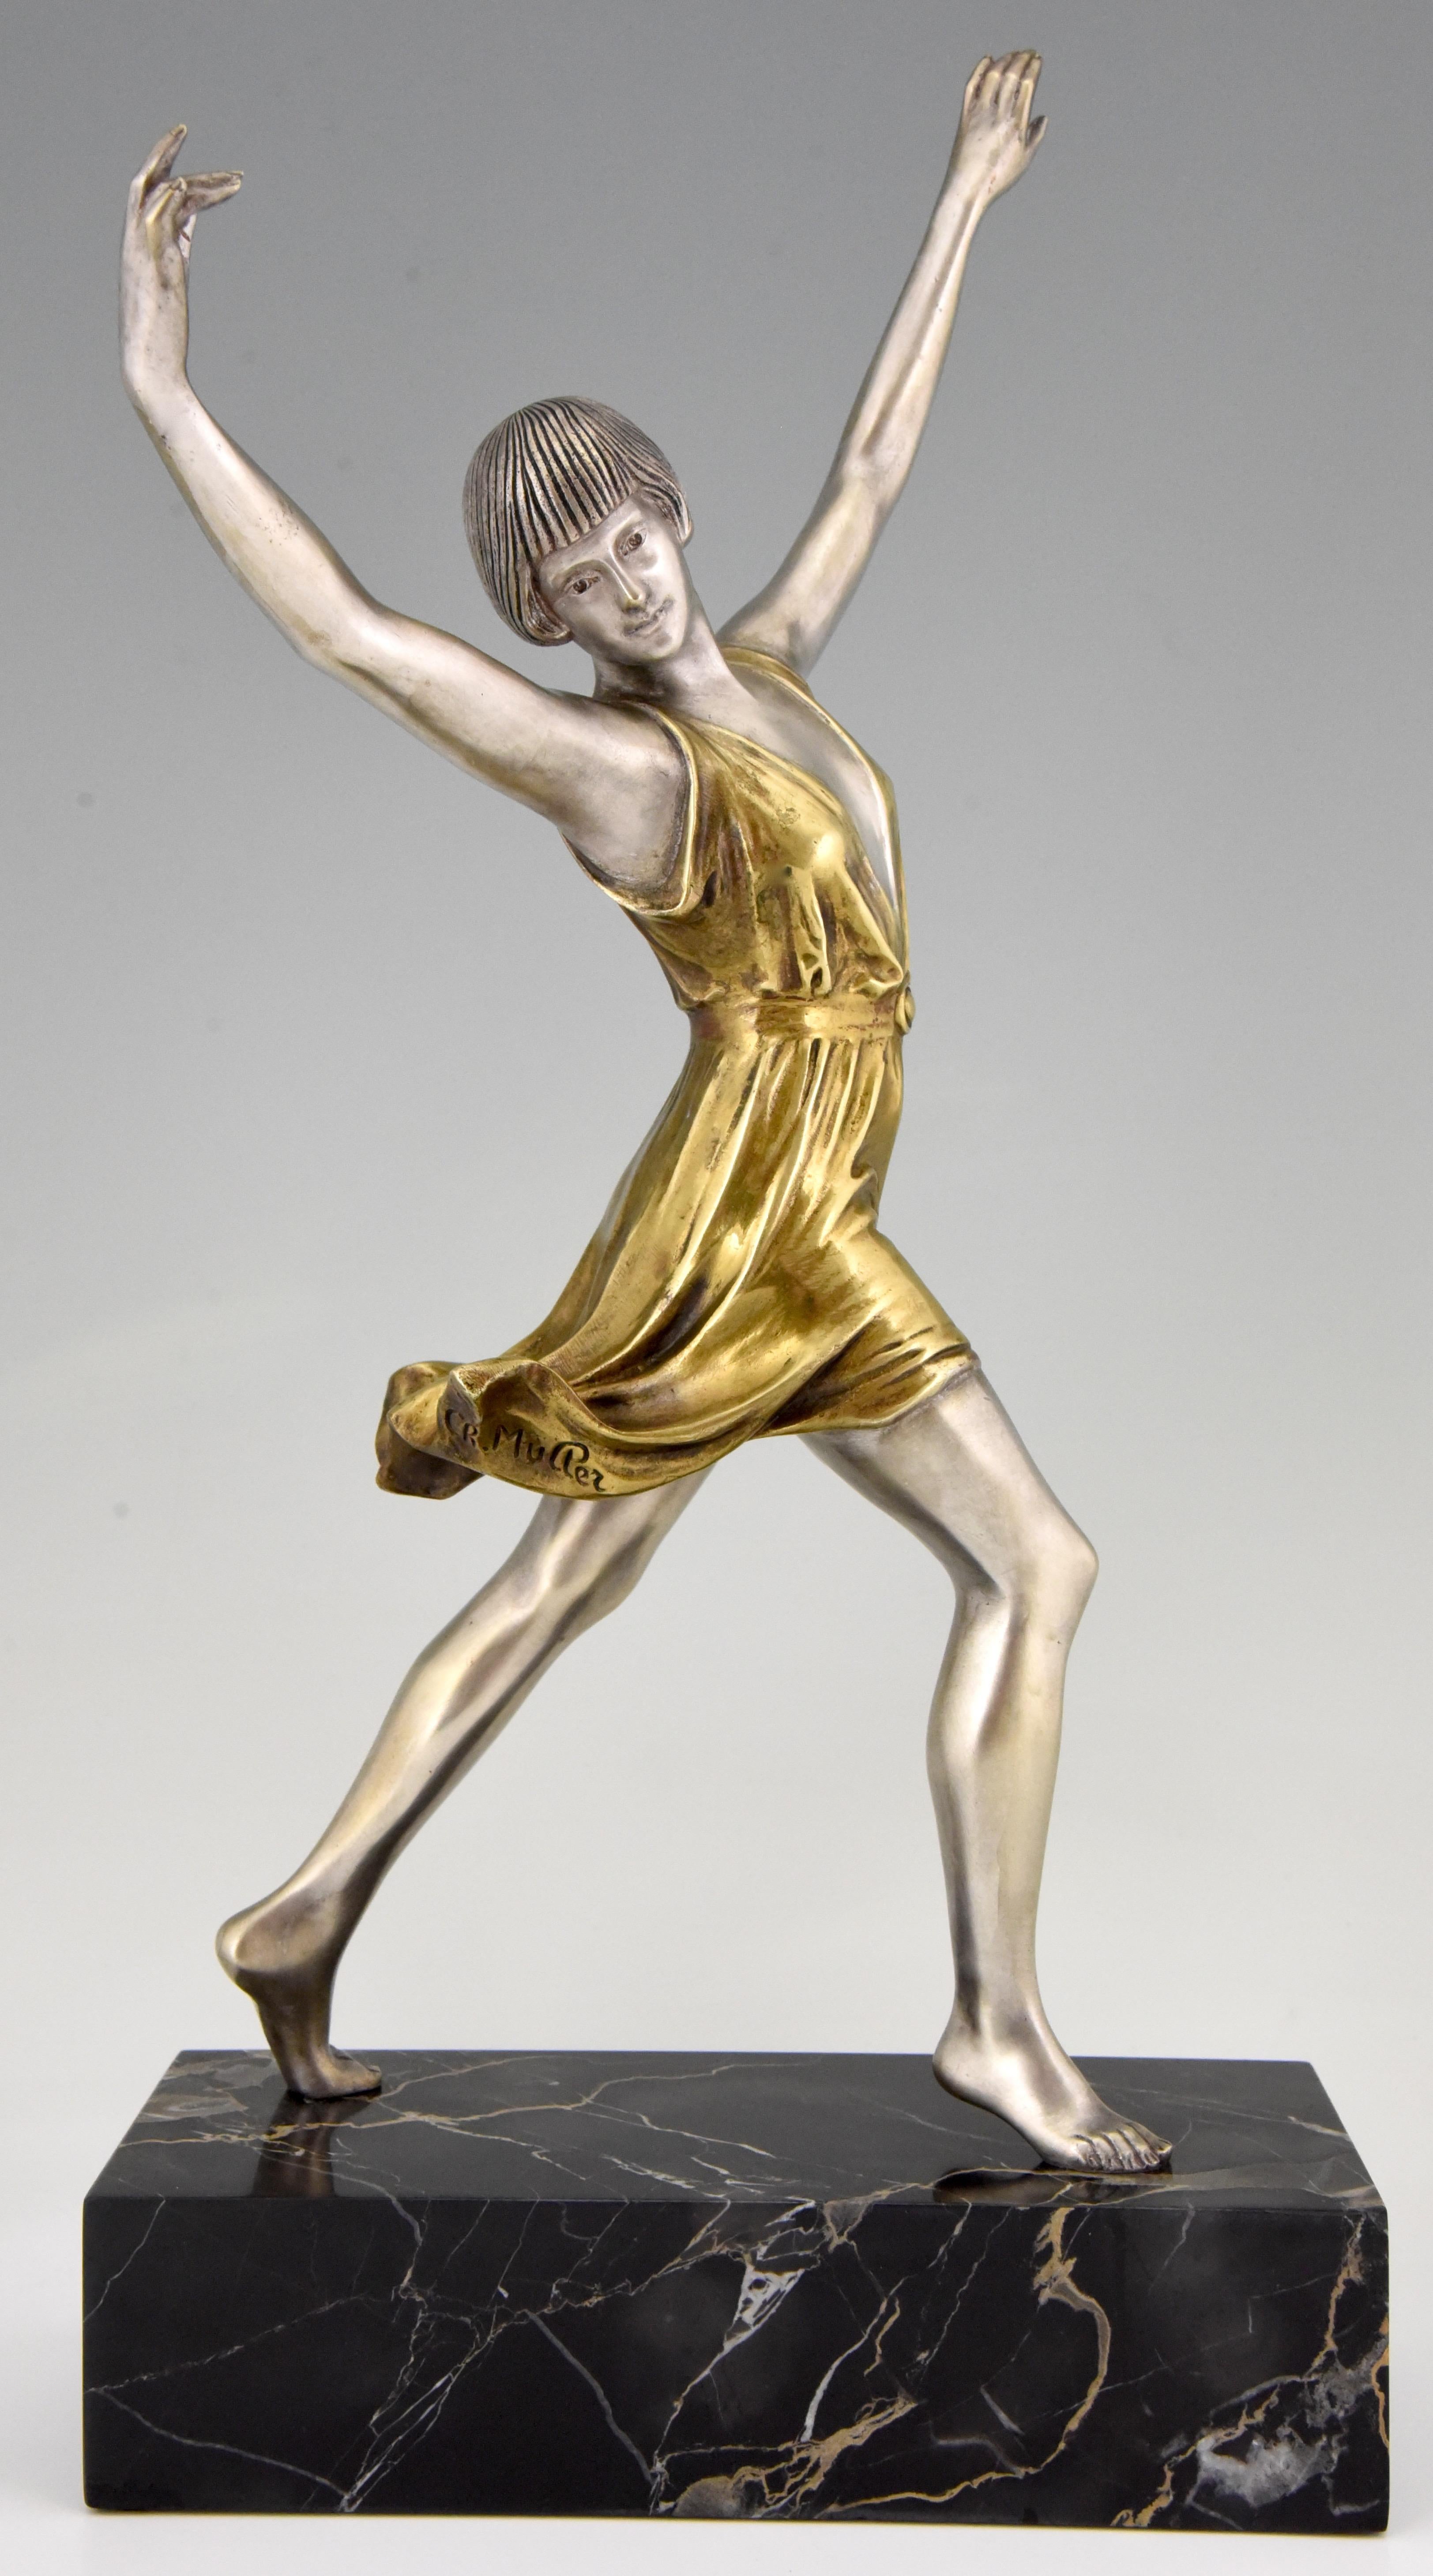 Art Deco bronze sculpture of a dancing woman signed by Charles Müller. The bronze has a lovely silver and gold patina and stands on a black marble base, France, circa 1925. 

Literature:
“Statuettes of the Art Deco period” Alberto Shayo.?“Art